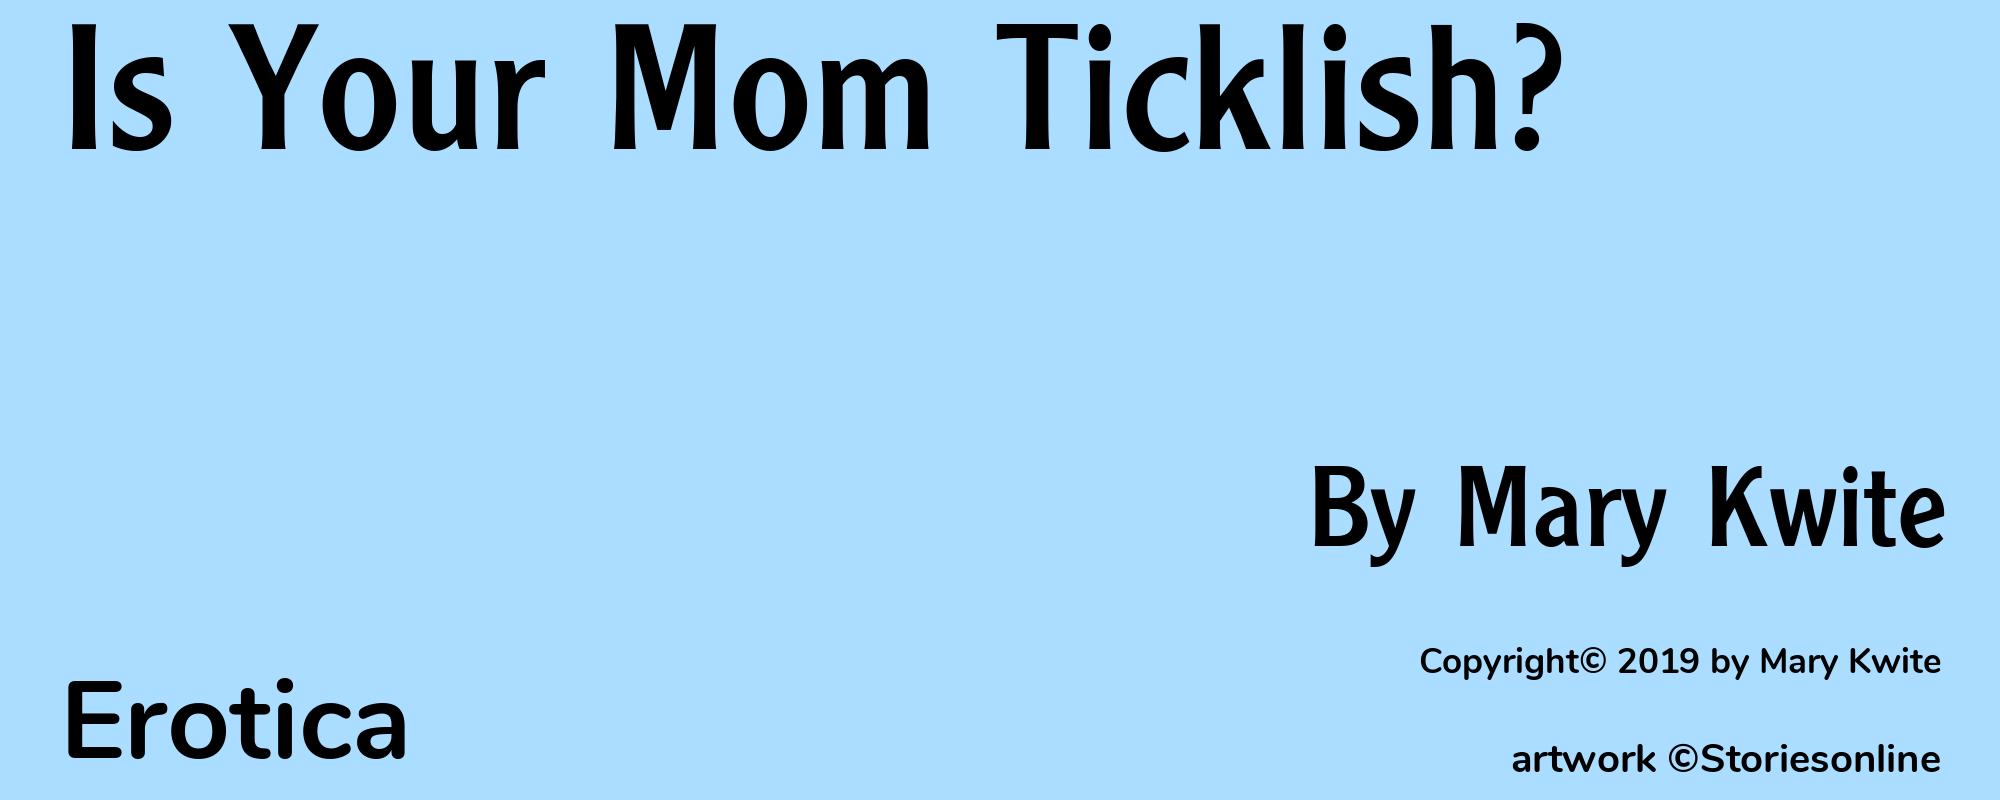 Is Your Mom Ticklish? - Cover